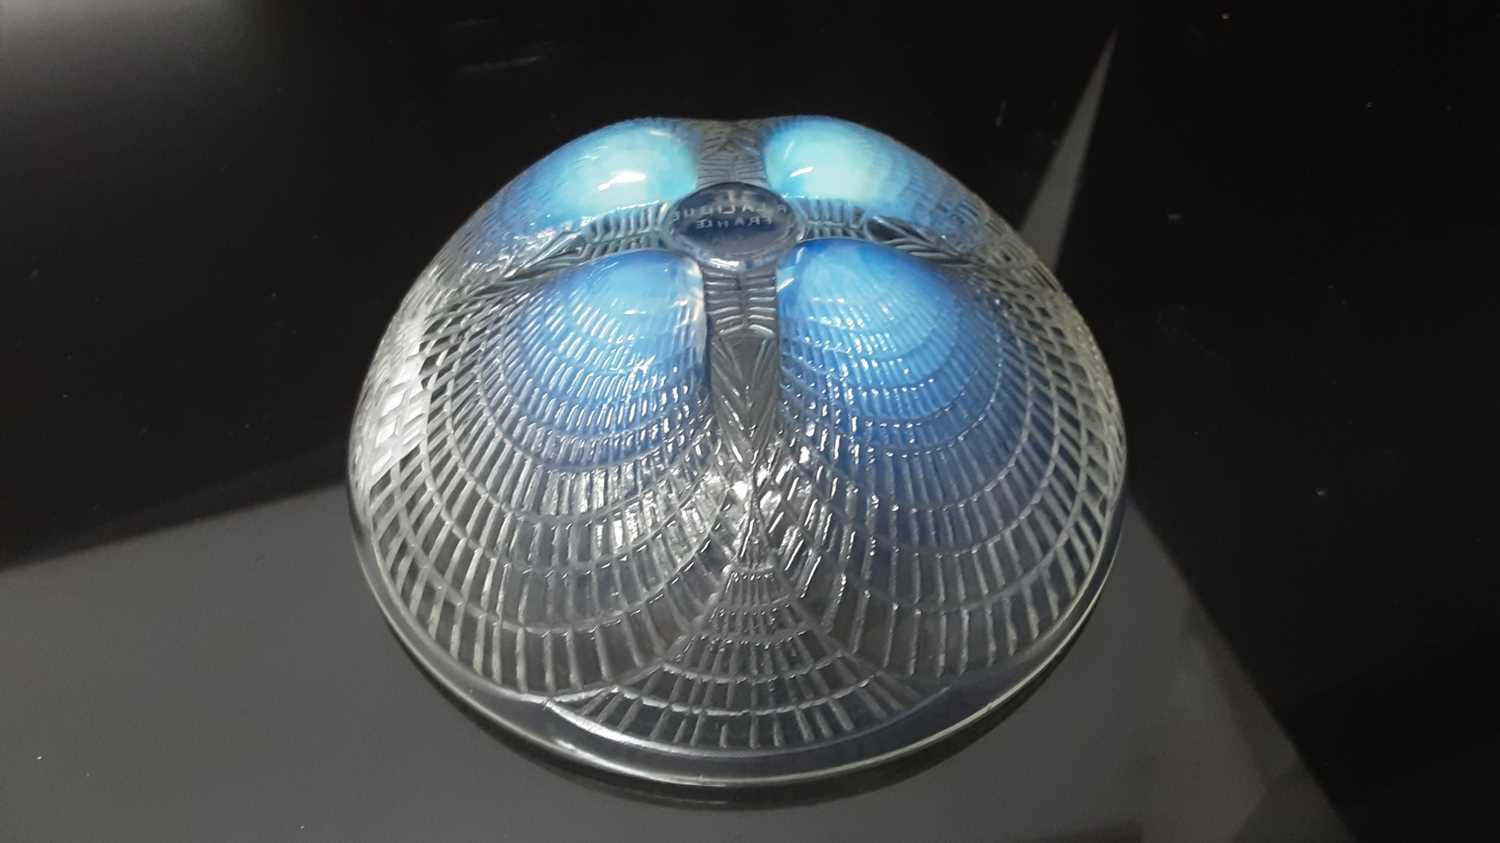 Rene Lalique Coquilles pattern opalescent glass bowl, signed on base, 12.5cm diameter - Image 4 of 4